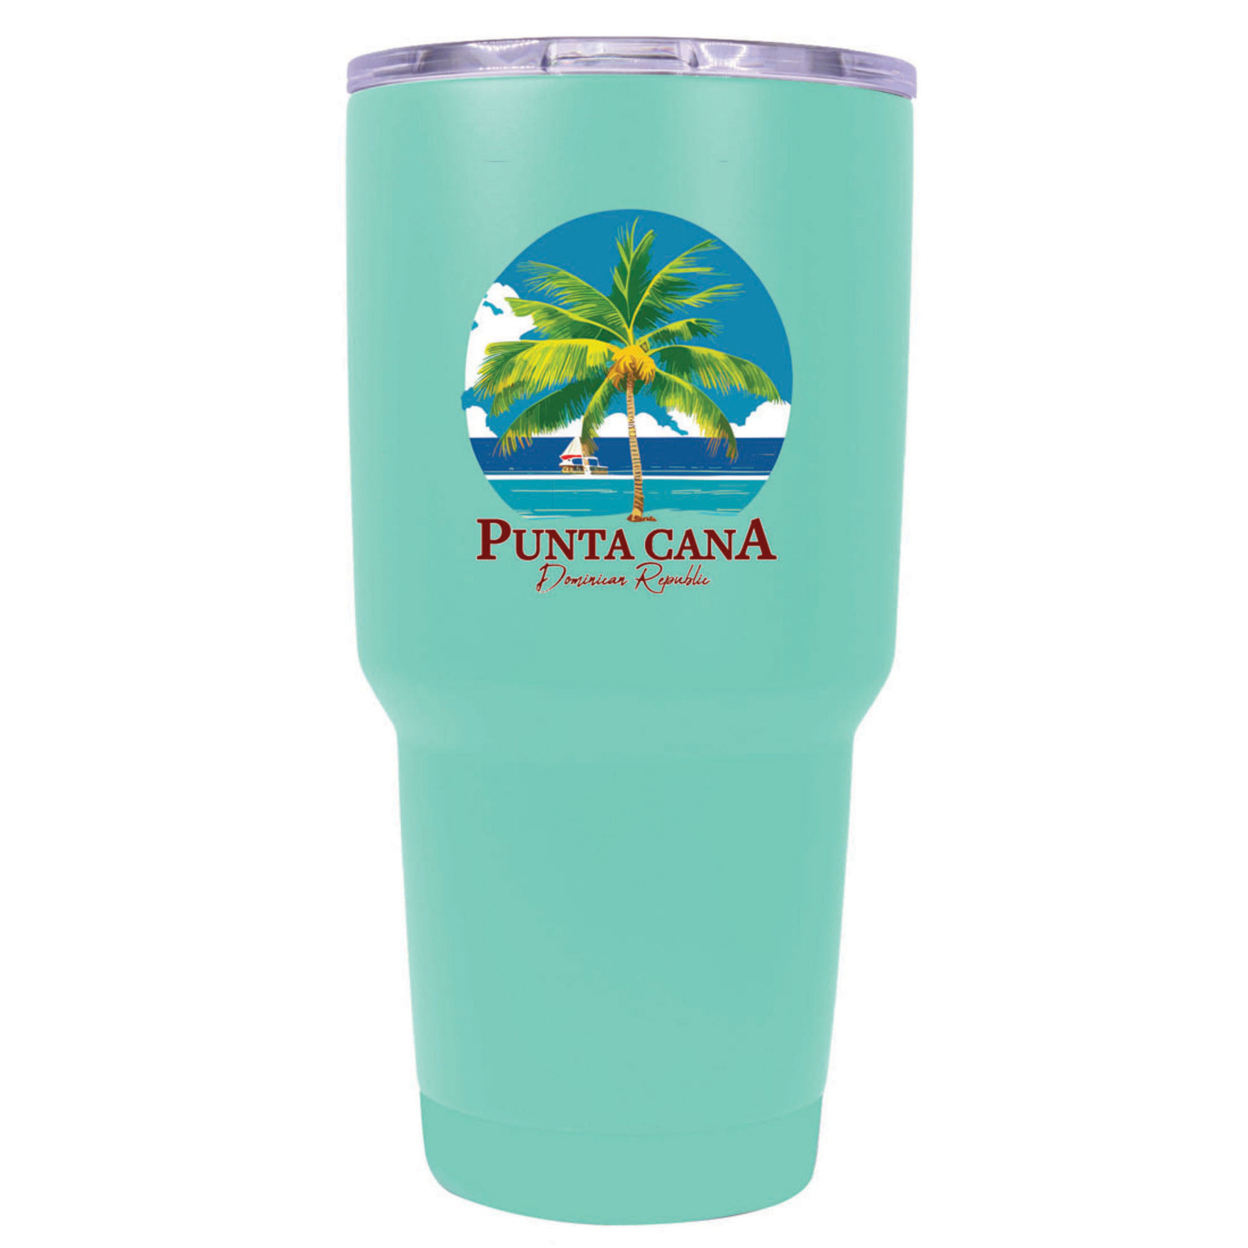 Punta Cana Dominican Republic Souvenir 24 Oz Insulated Stainless Steel Tumbler - Green, PARROT